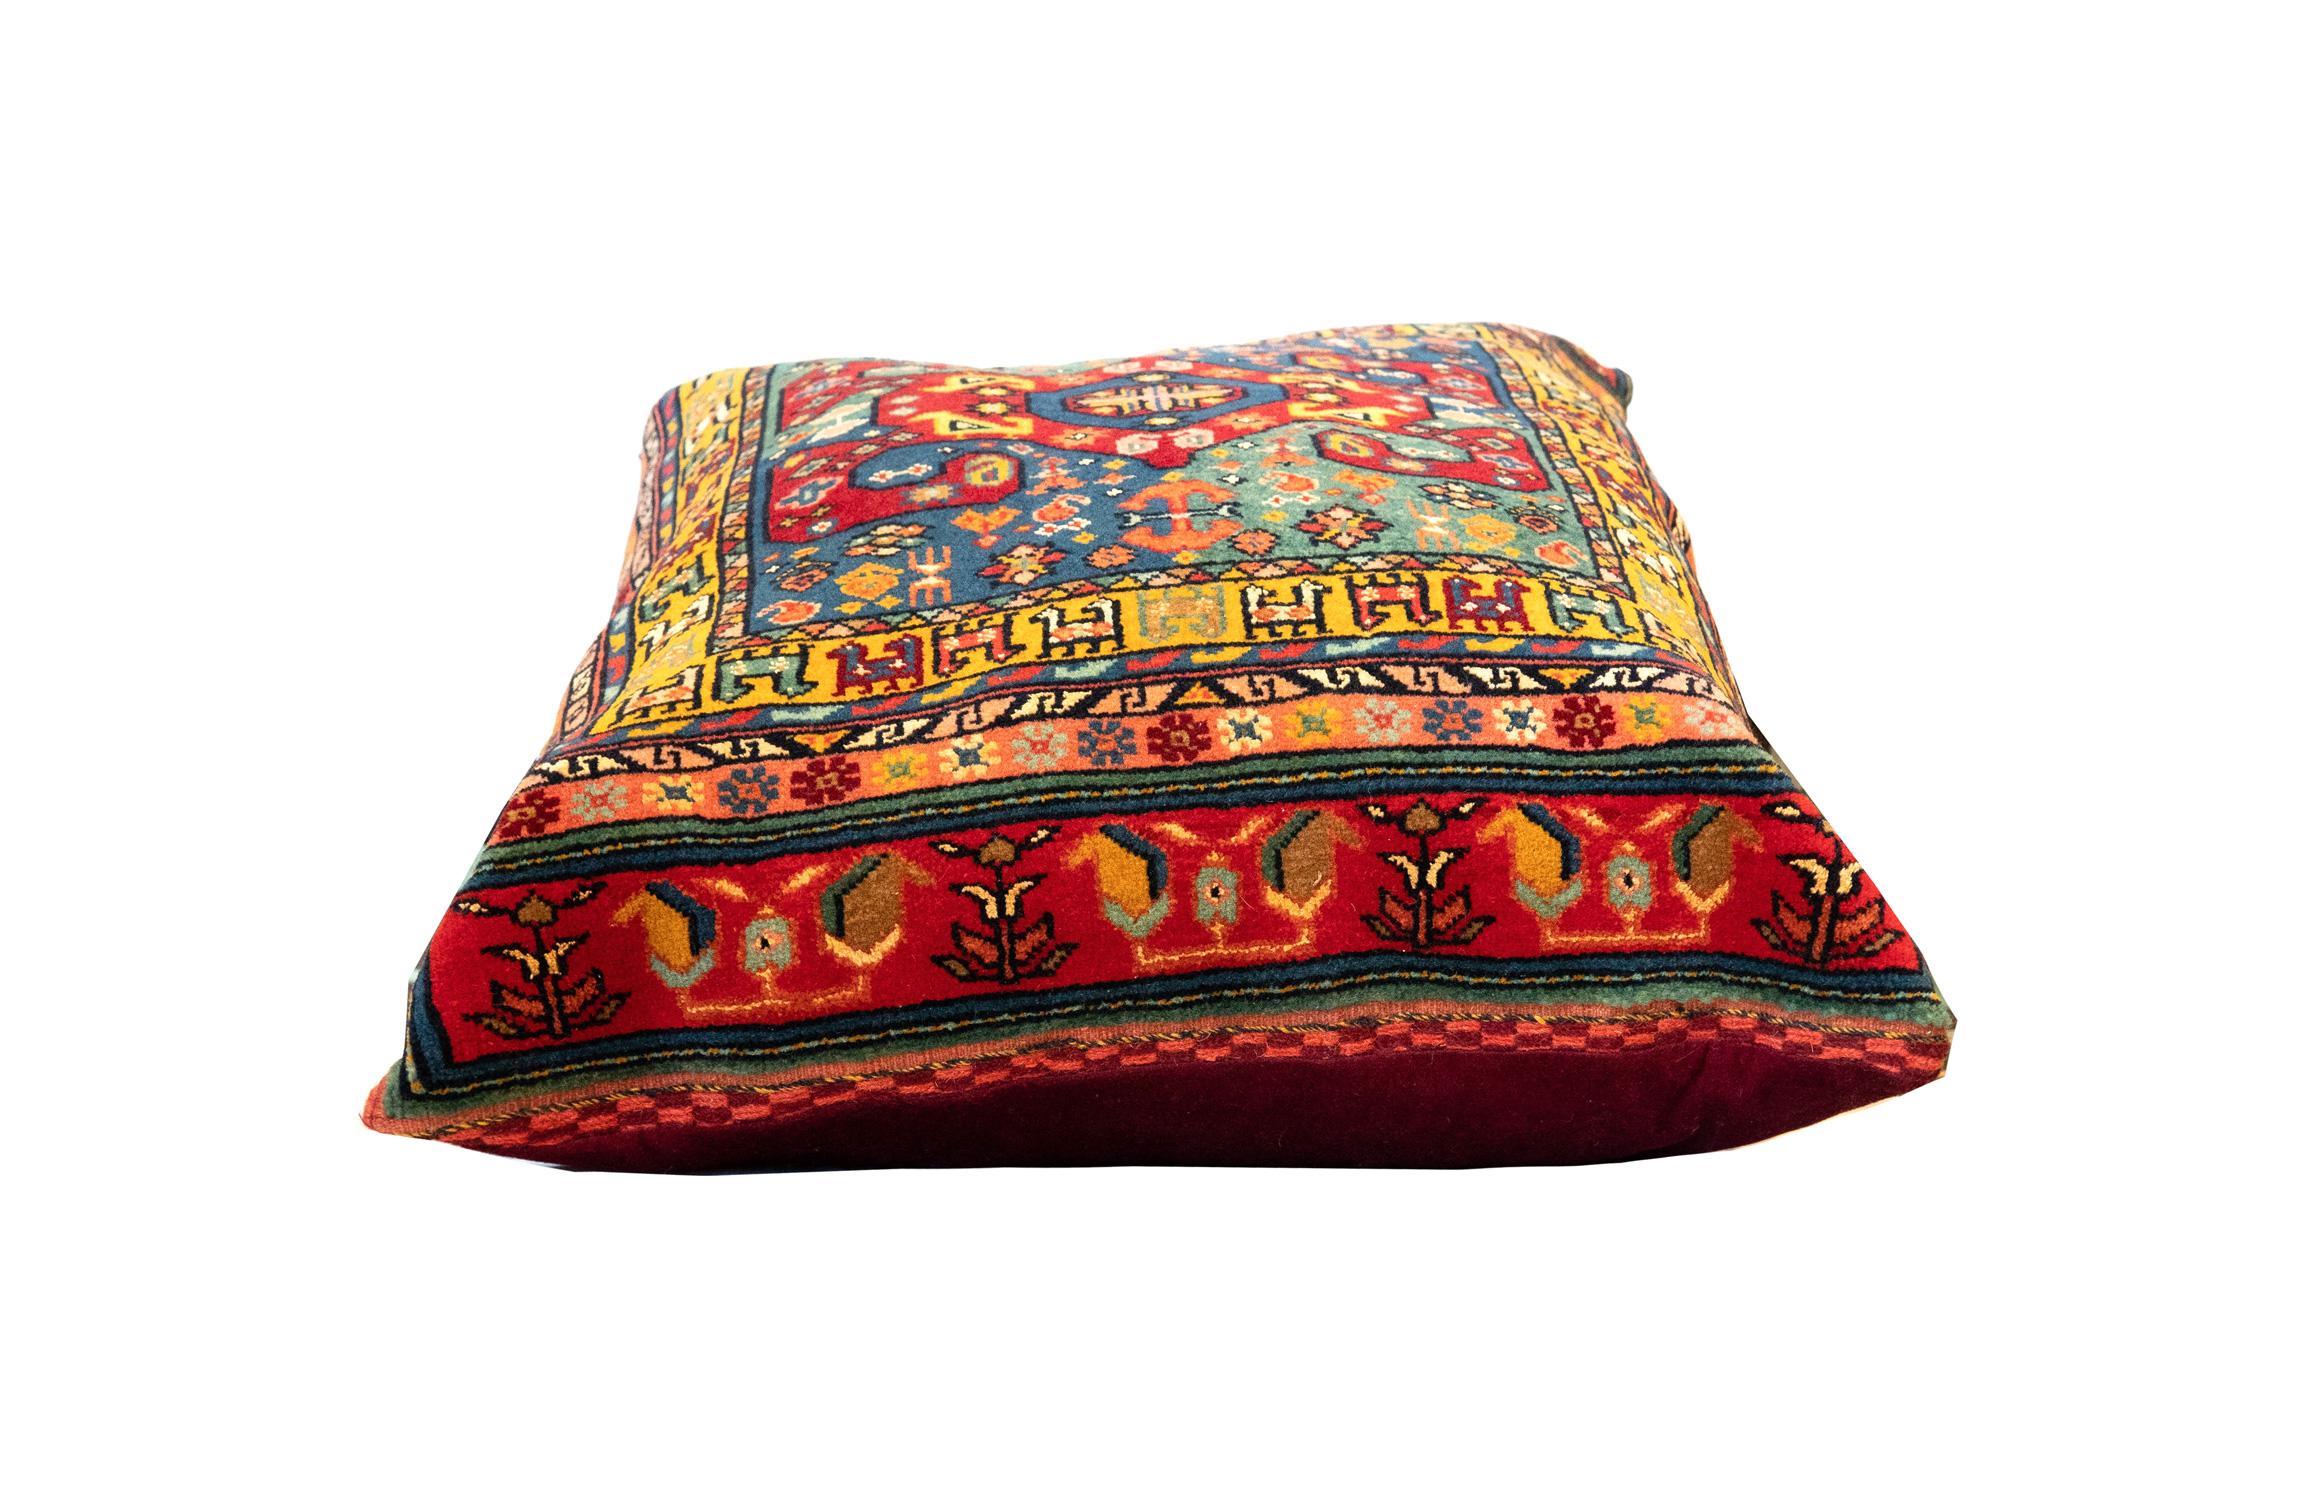 This fantastic floor cushion features a highly detailed geometric design. Hand-knotted with wool, which has been dyed using traditional vegetable dyeing techniques. Decorate your bed, sofa or floor with this fantastic piece as a scatter cushion. Mix